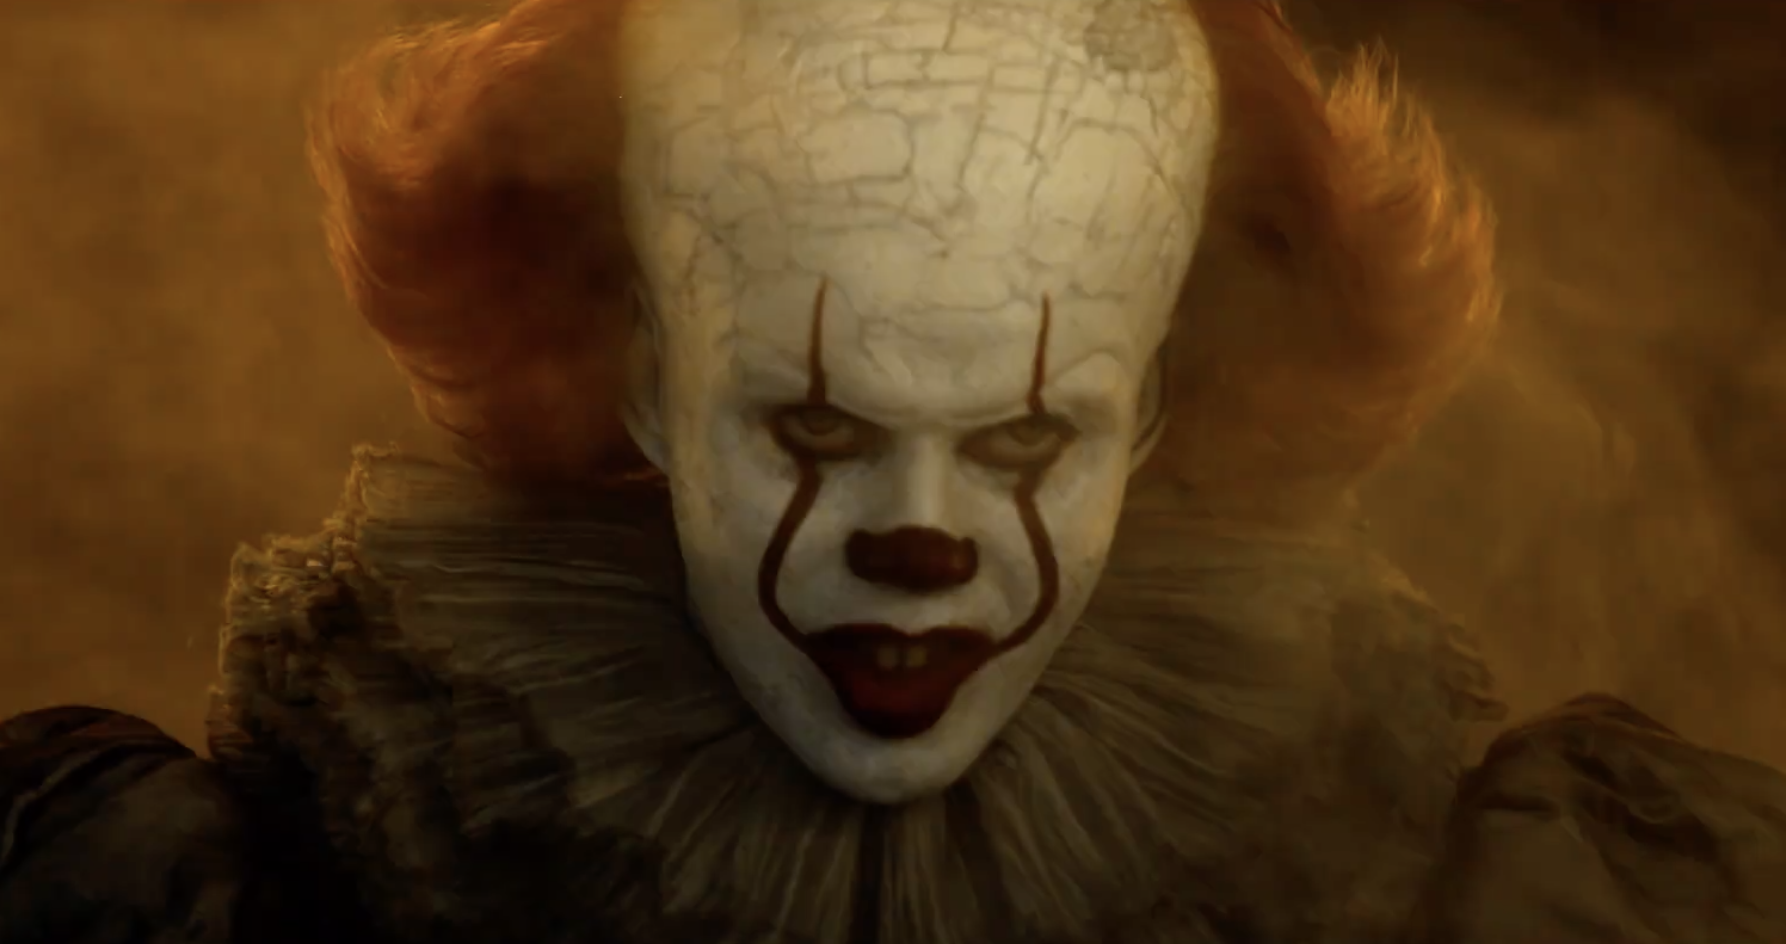 IT: Chapter Two Writer Talks Possibilities Of Spin-Off And “Supercut”